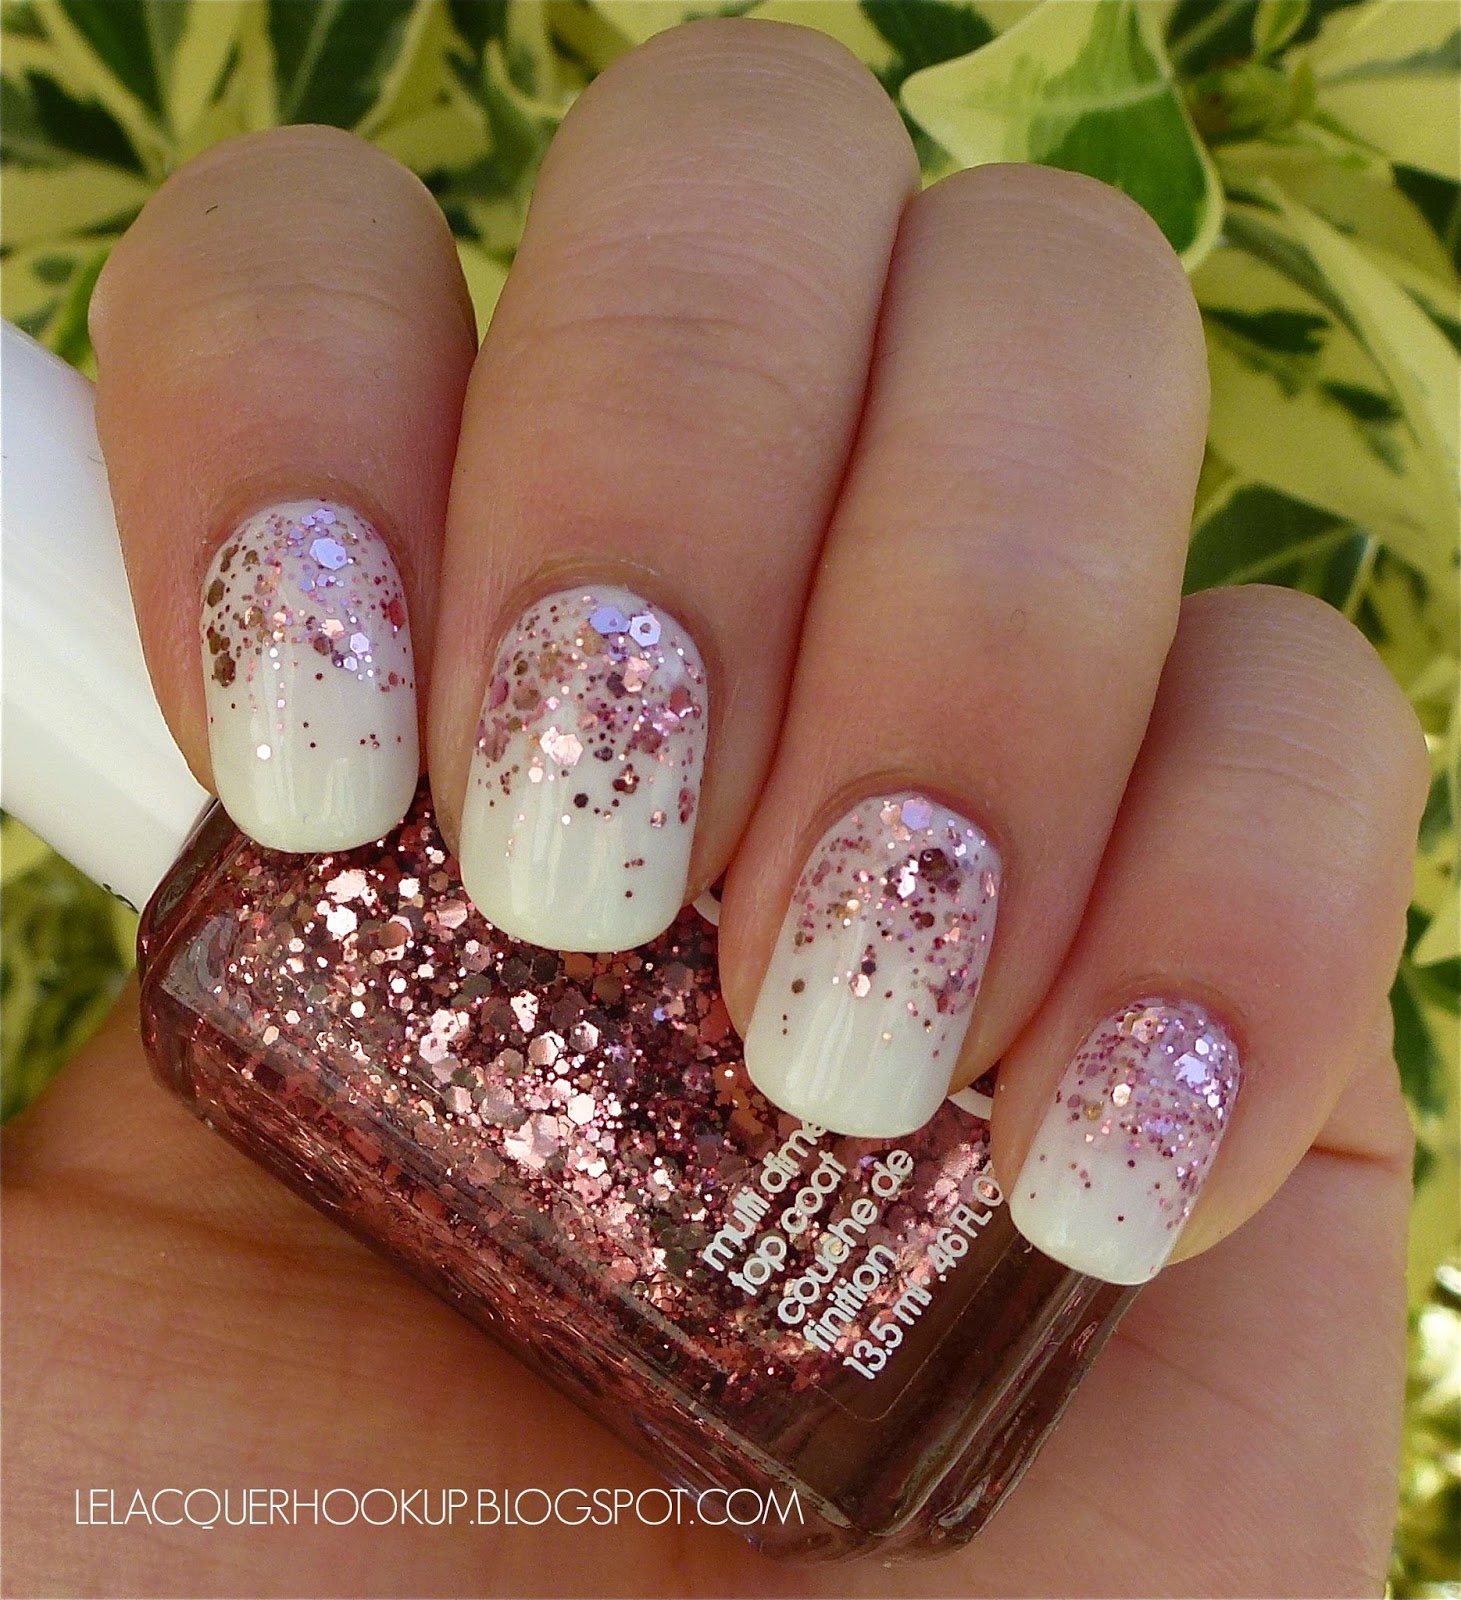 LE LACQUER HOOK UP: Essie Marshmallow + A Cut Above